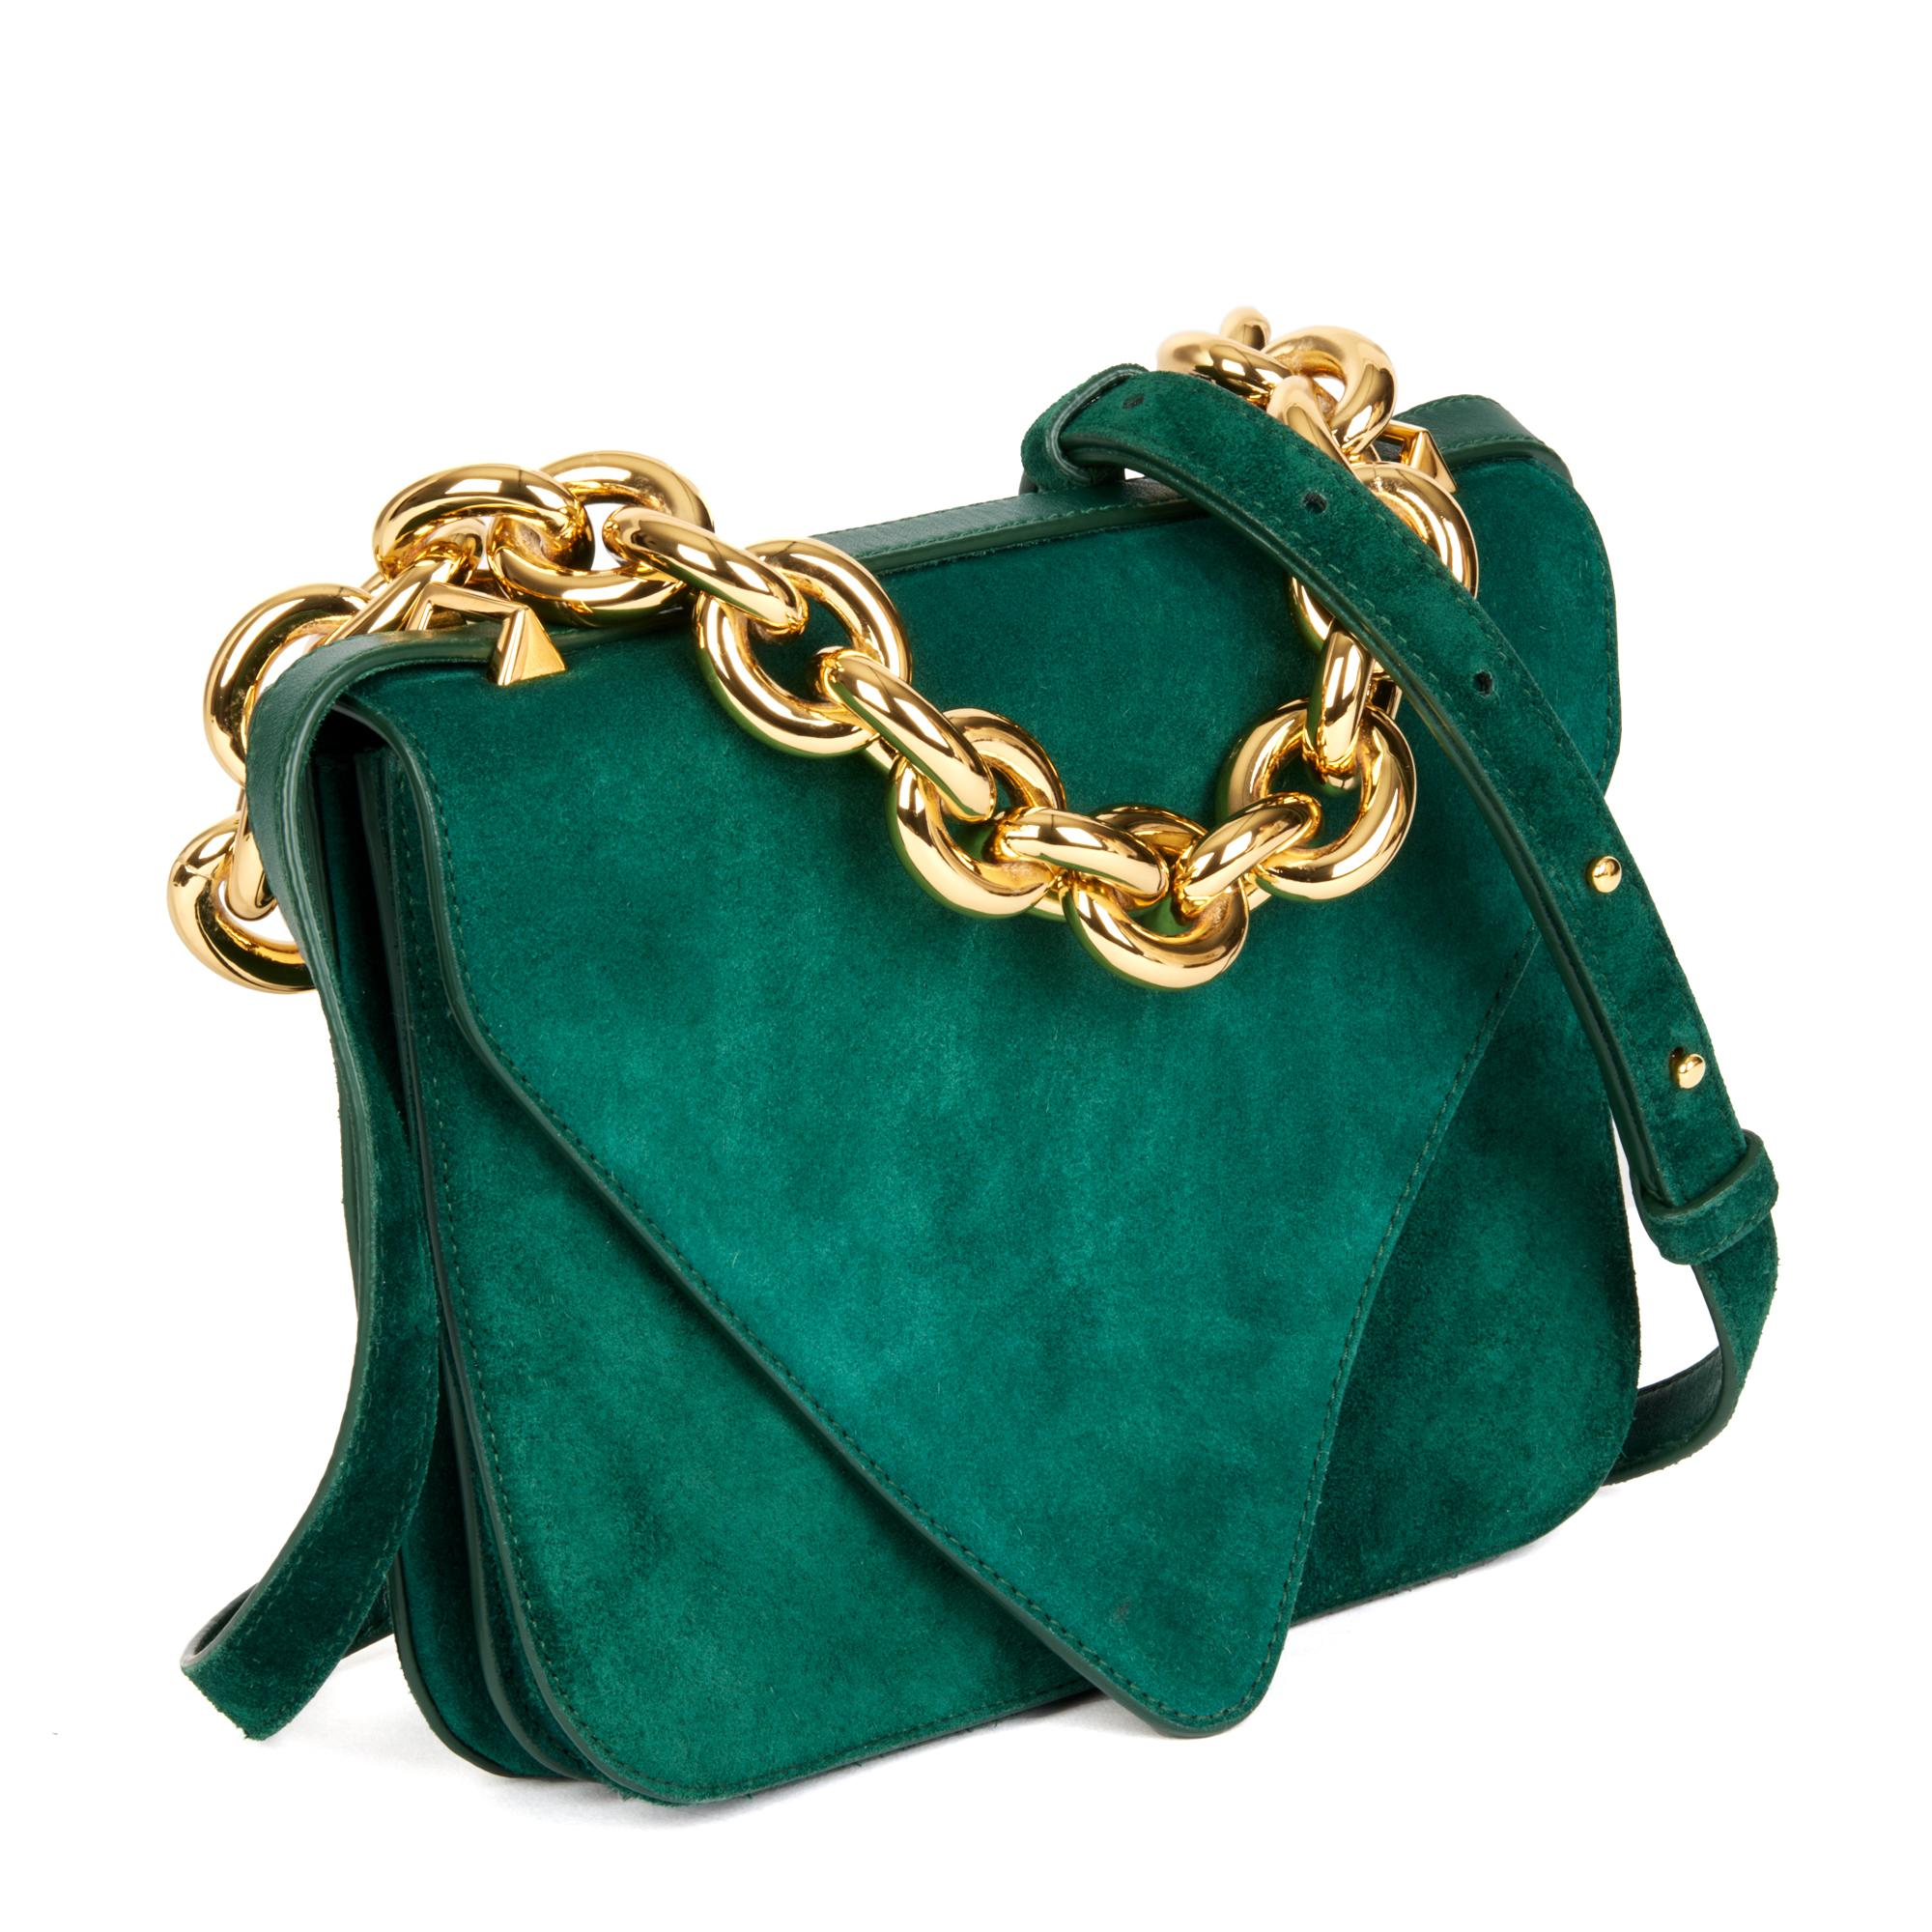 BOTTEGA VENETA
Emerald Green Suede Small Mount Shoulder Bag

Xupes Reference: CB582
Serial Number: P01904860R
Age (Circa): 2021
Accompanied By: Bottega Veneta Dust Bag
Authenticity Details: (Made in Italy)
Gender: Ladies
Type: Shoulder, Crossbody,